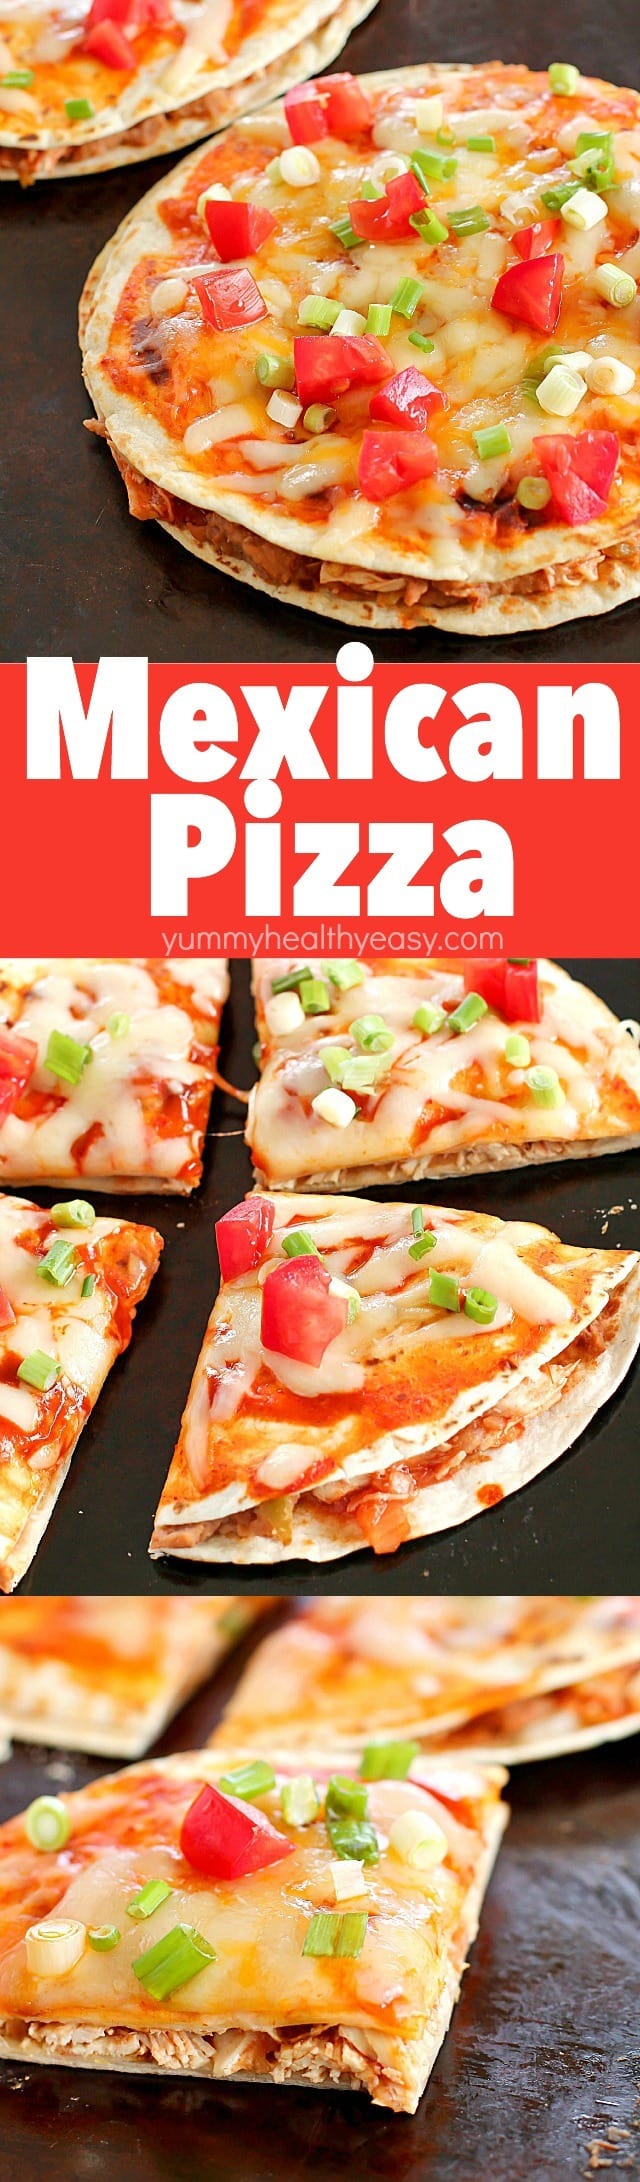 How about Mexican Pizzas for dinner? They're an easy, yummy recipe of layered flour tortillas with a filling of refried beans, shredded chicken and salsa. Top it off with a little enchilada sauce and cheese, bake for a few minutes, and you got yourself an incredible Mexican Pizza for dinner!